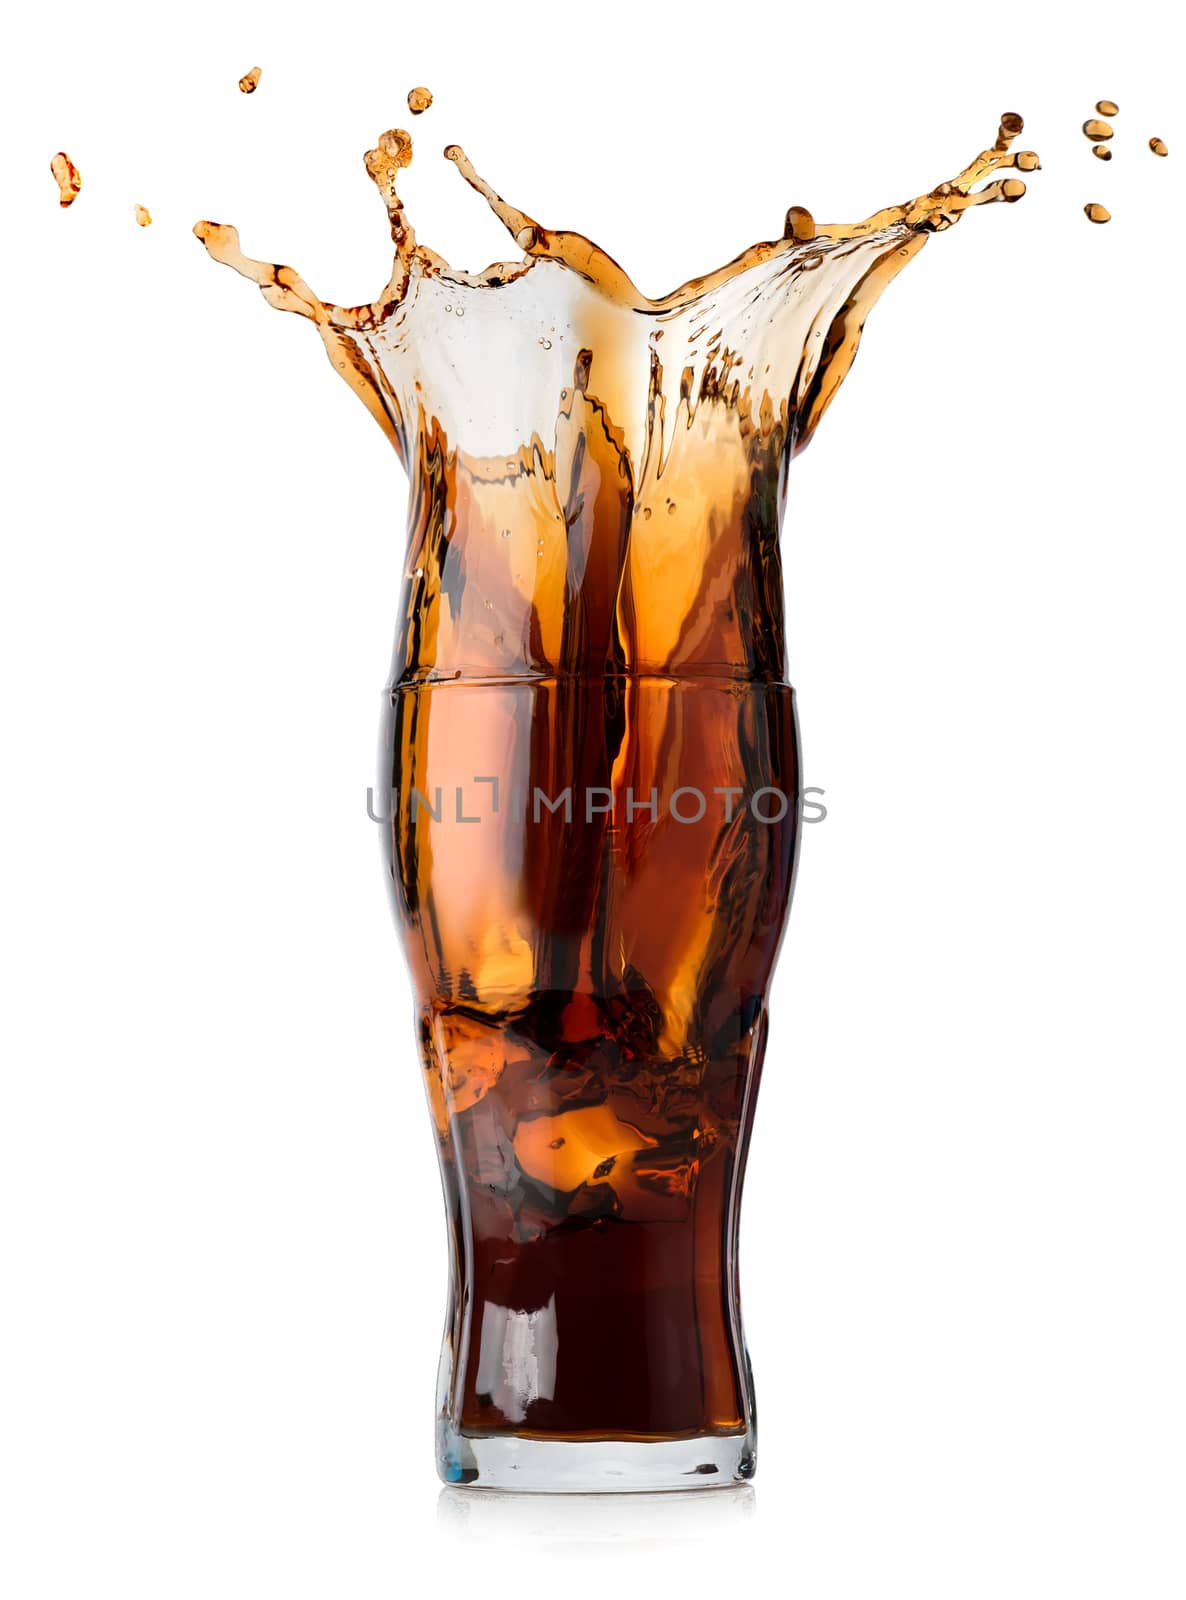 Splash of cola in a glass isolated on a white background